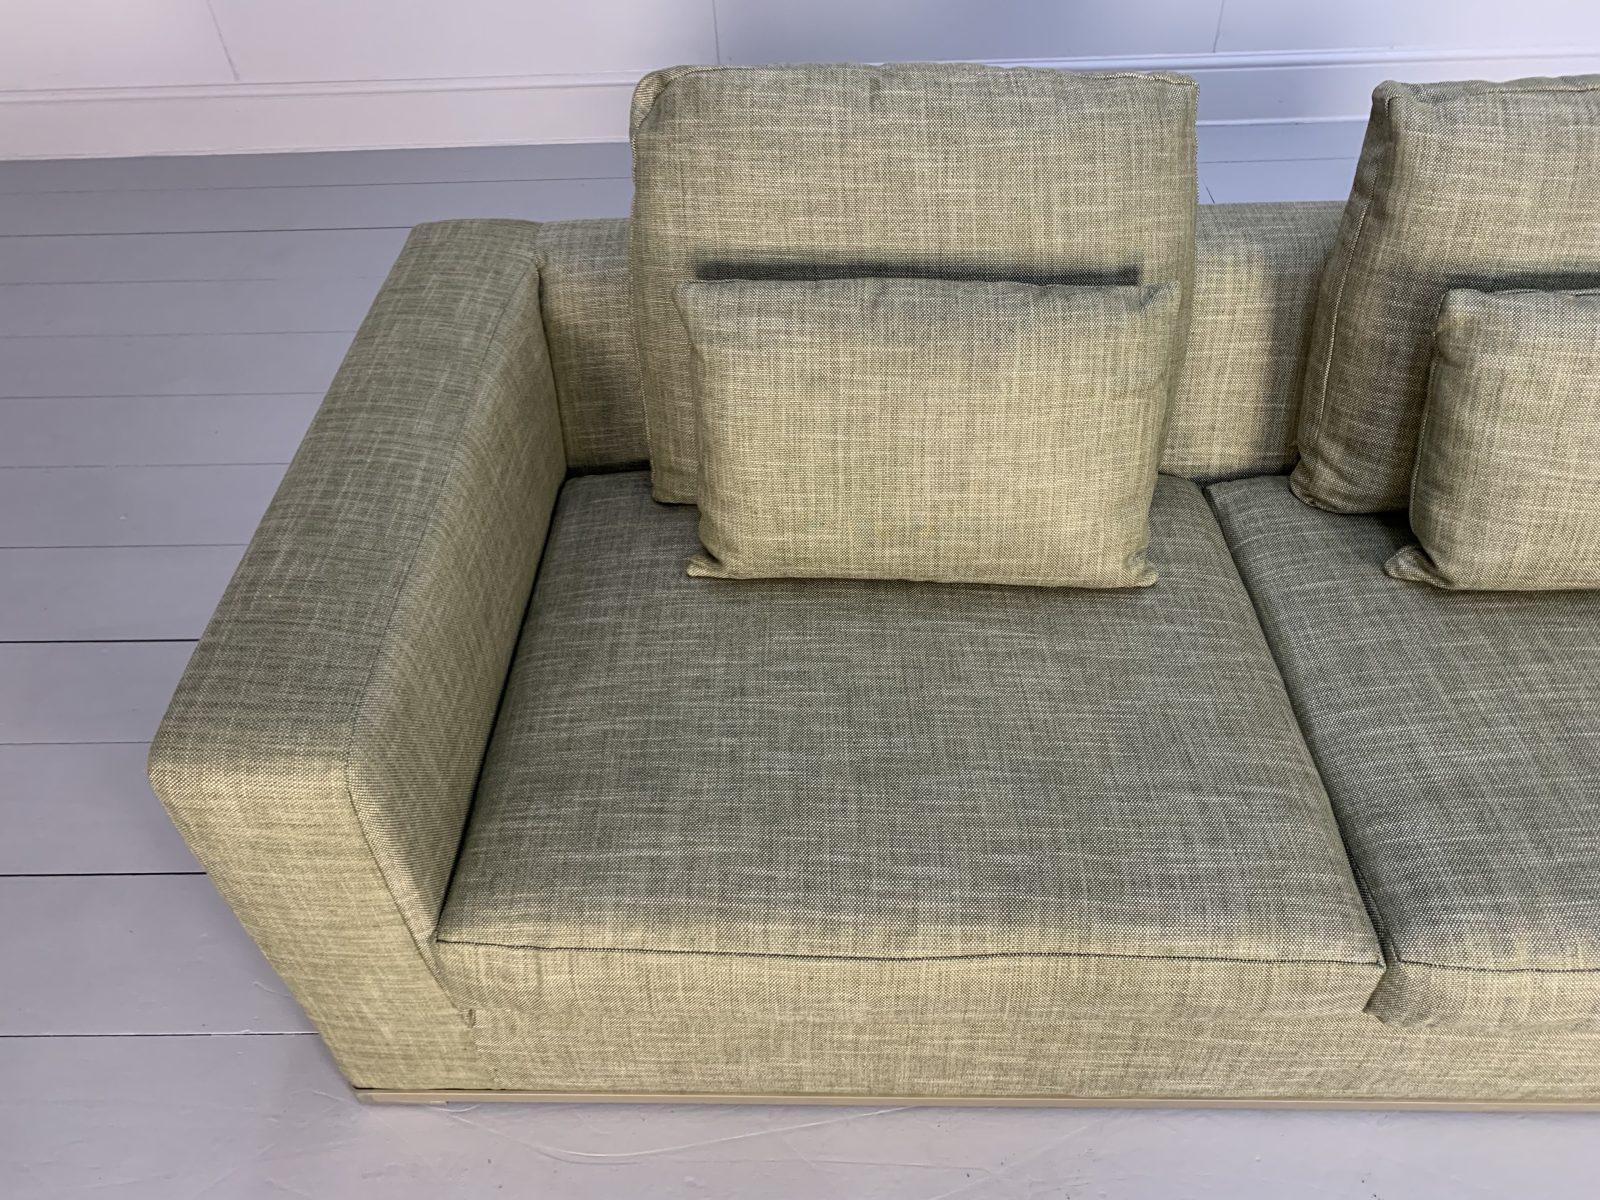 Pair of B&B Italia “Omnia” Sofas, 2.5-Seat, in Pale Green Linen For Sale 2